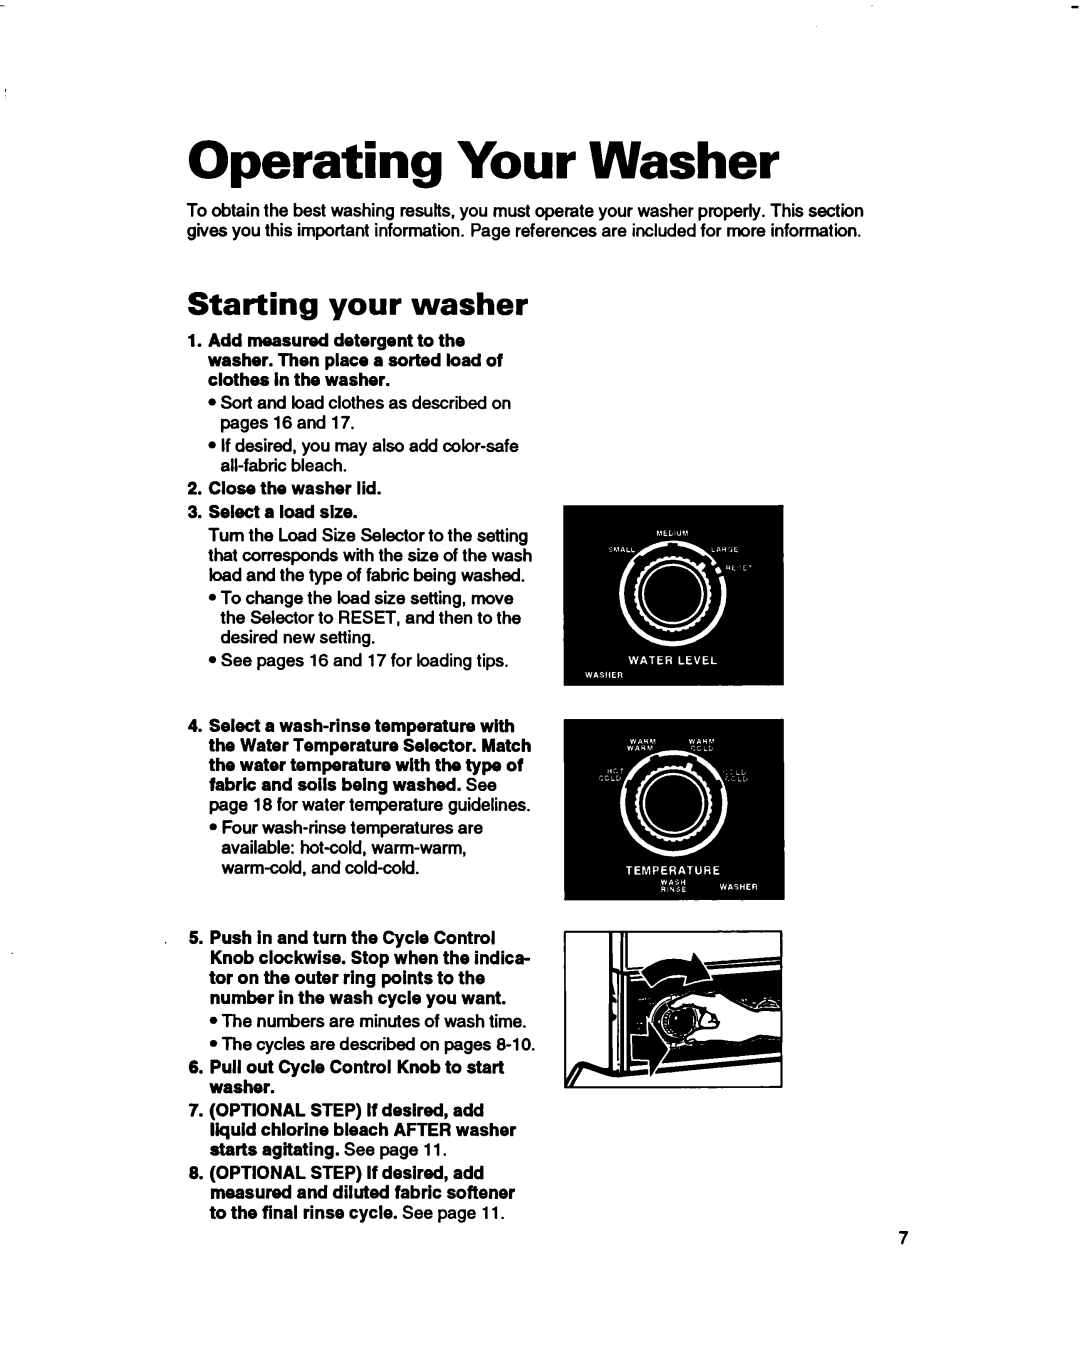 Whirlpool 3396314 warranty Starting your washer, Operating Your Washer 